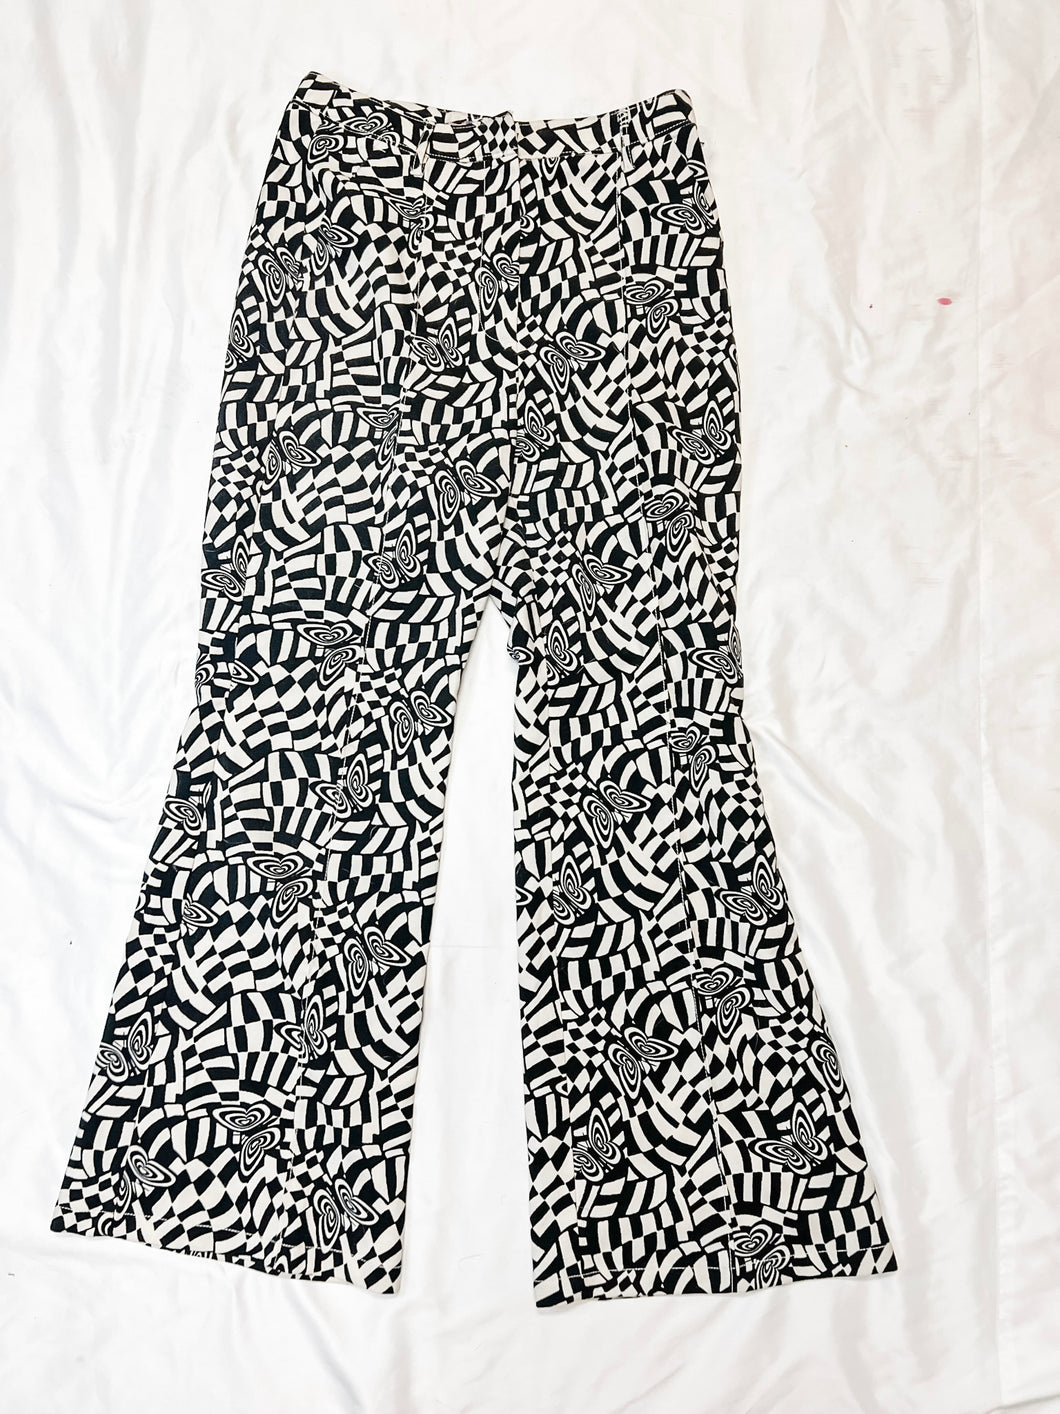 Urban Outfitters ( U ) Pants Size 9/10 (30) 1-M0196